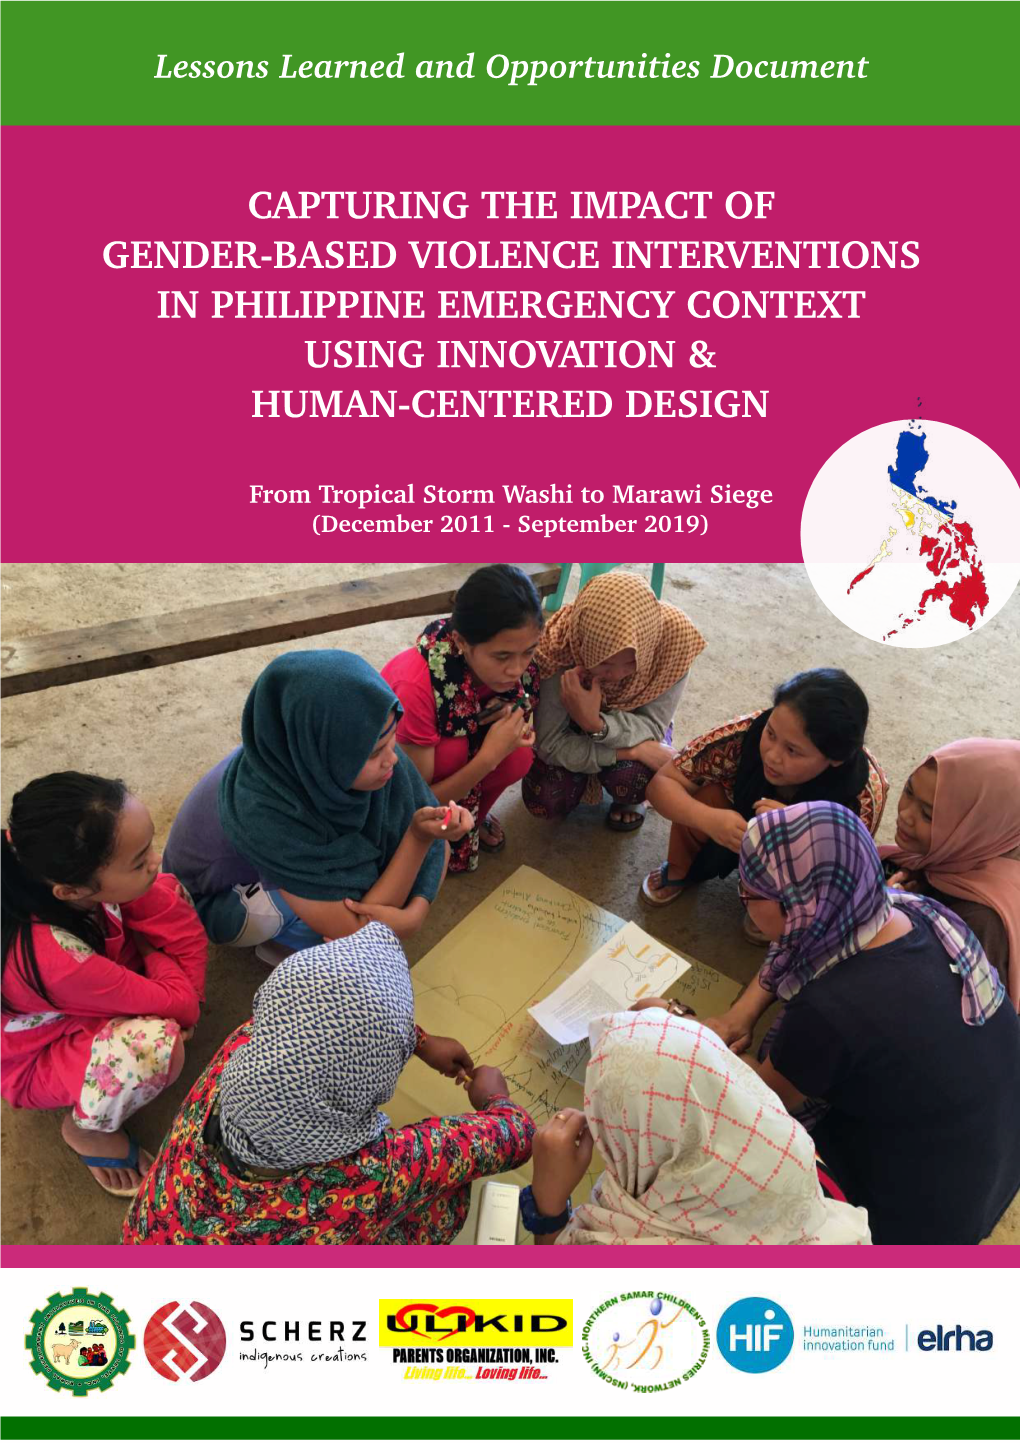 Capturing the Impact of Gender-Based Violence Interventions in Philippine Emergency Context Using Innovation & Human-Centered Design